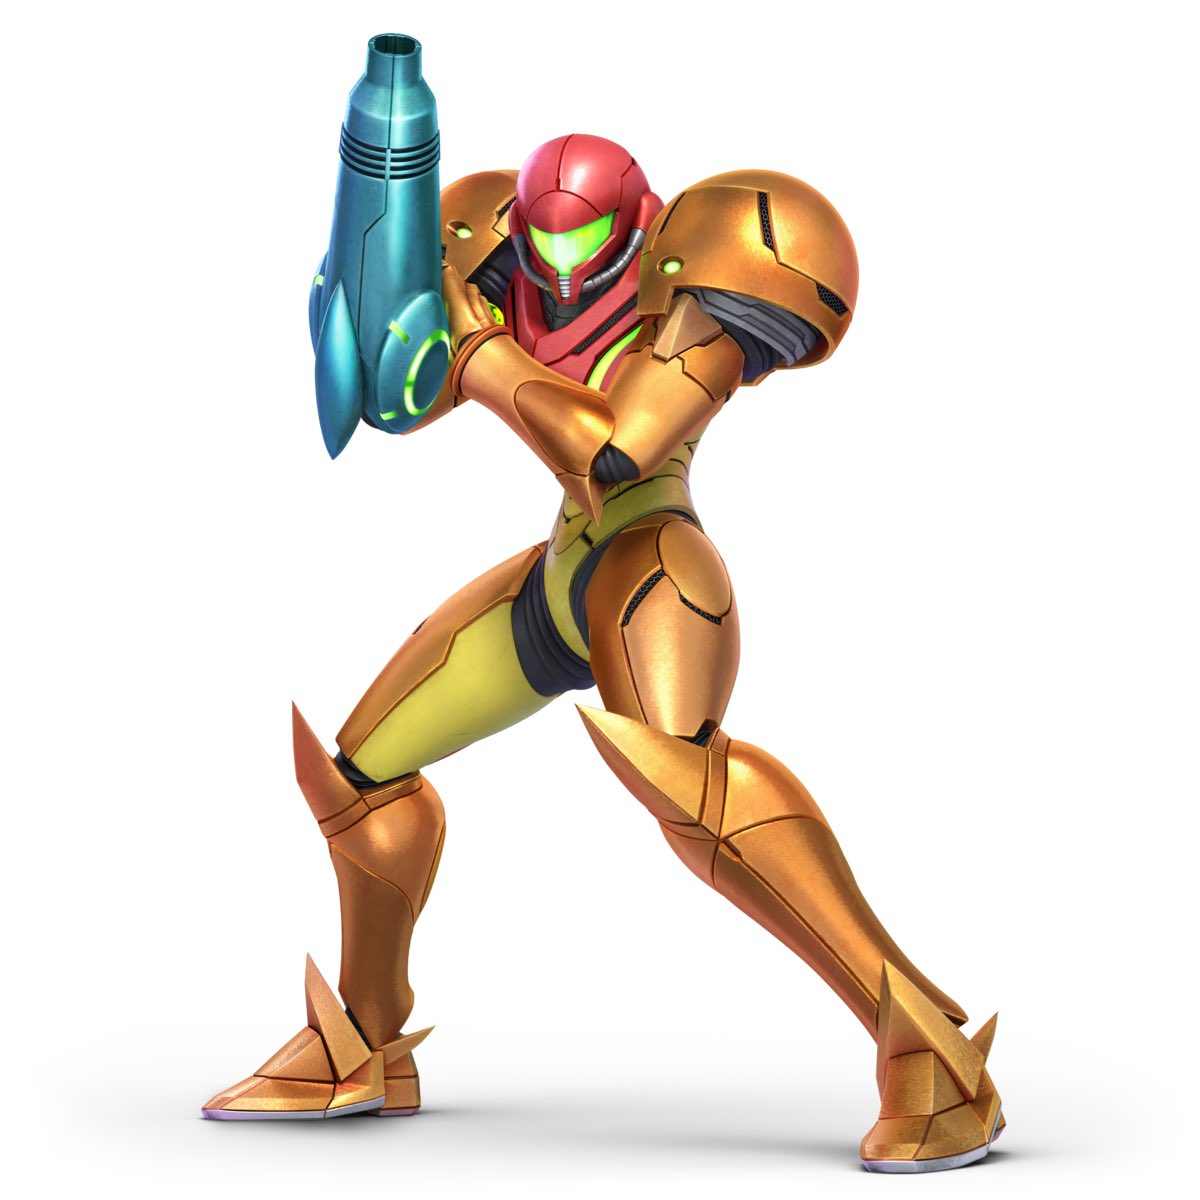 Samus Mains: Nobody actually plays Samus offline. Those that do are really chill and have a nerd boner for Metroid.Samus players online don’t even like Samus. They also don’t like fun. They’ll run 80 youtube videos at once to throttle their connection and watch you suffer n cry